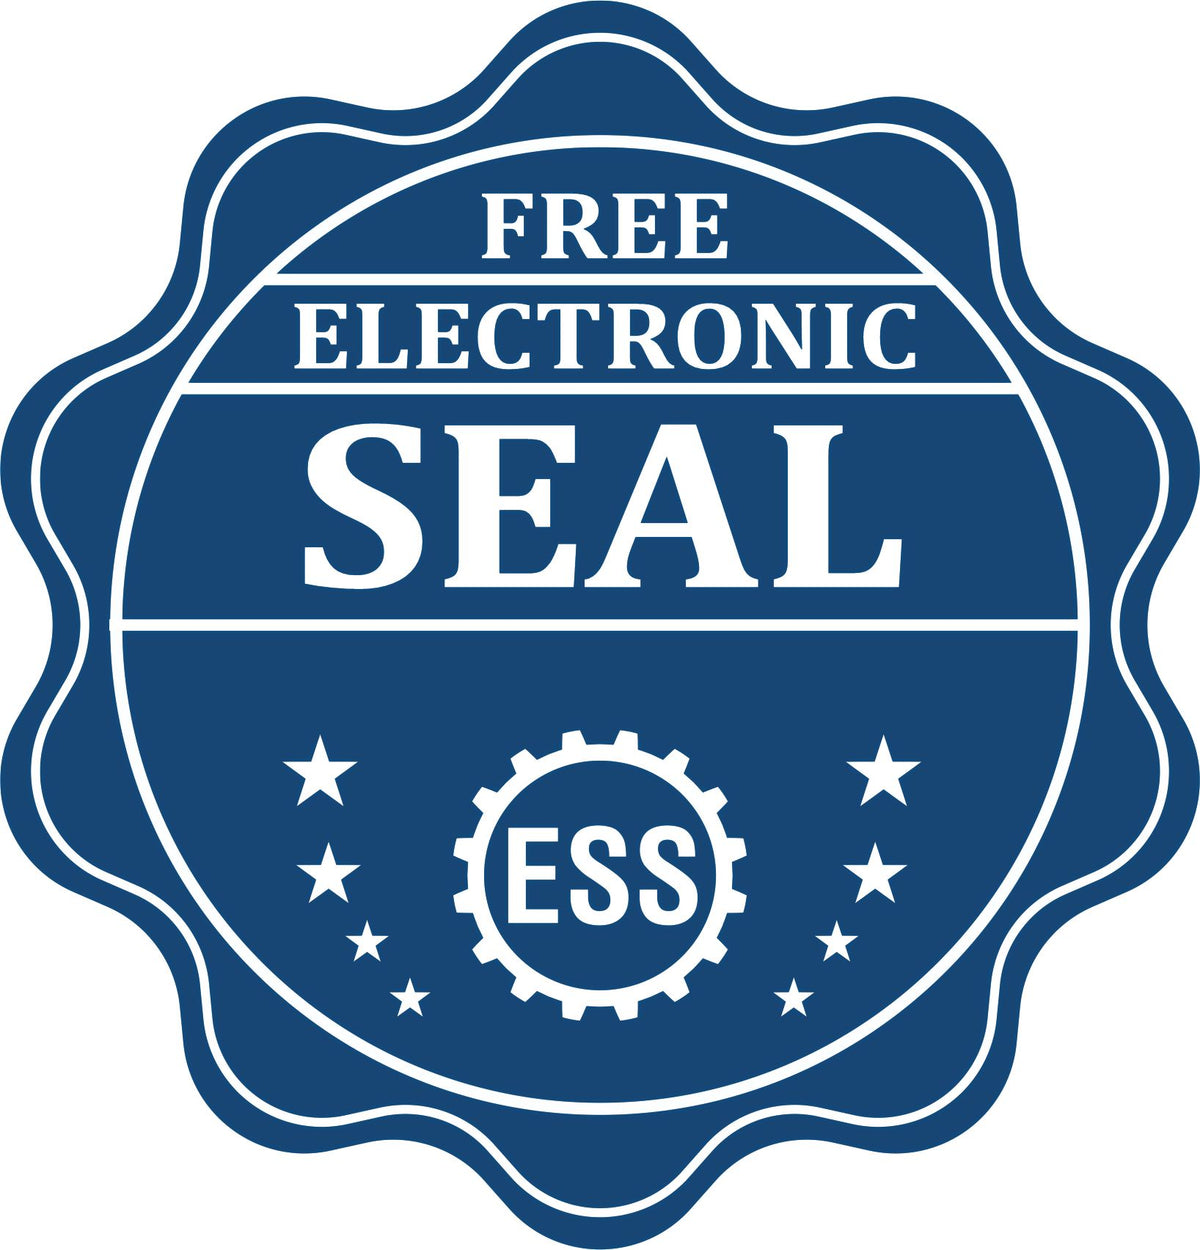 A badge showing a free electronic seal for the Wooden Handle Indiana Rectangular Notary Public Stamp with stars and the ESS gear on the emblem.